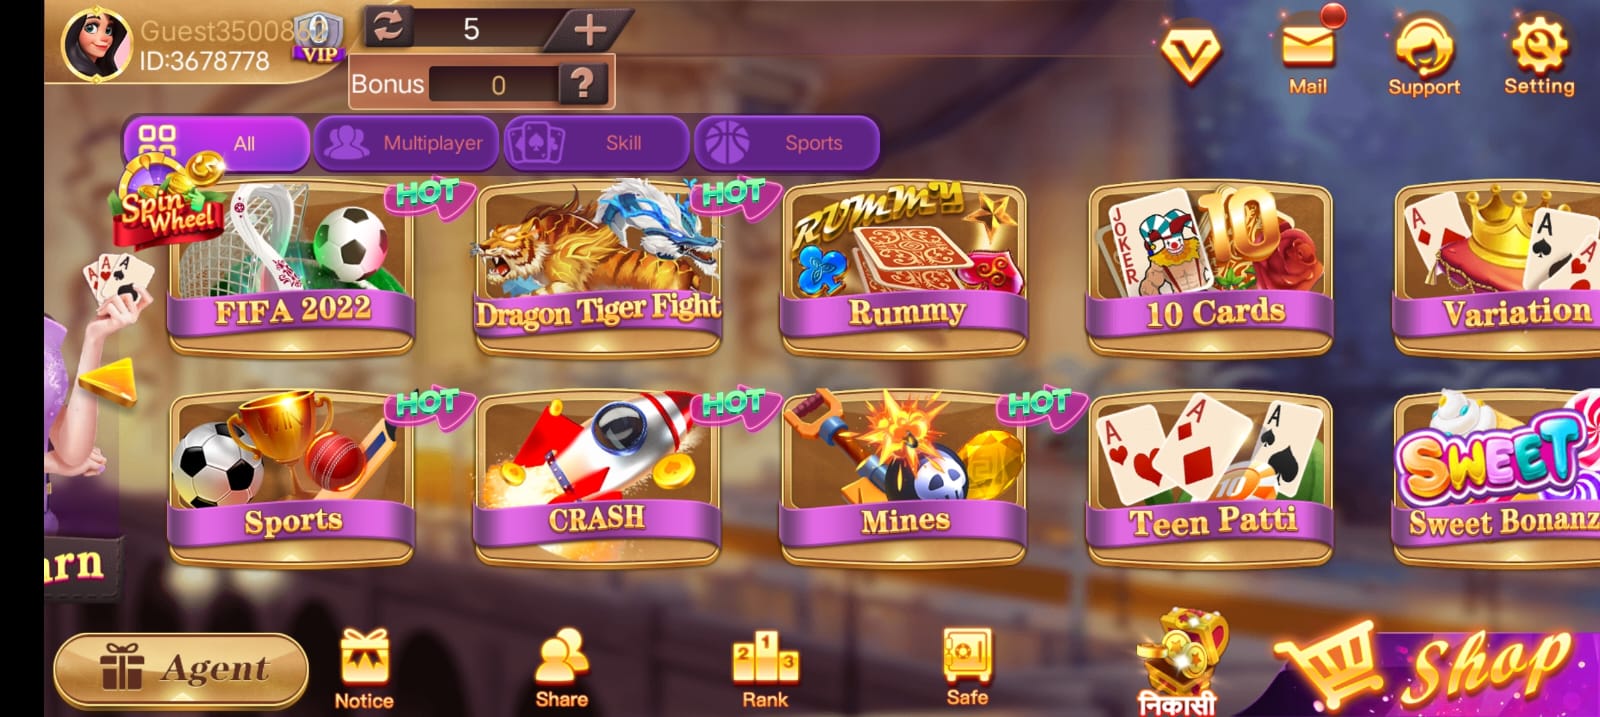 Available Games on Teen Patti King Apk